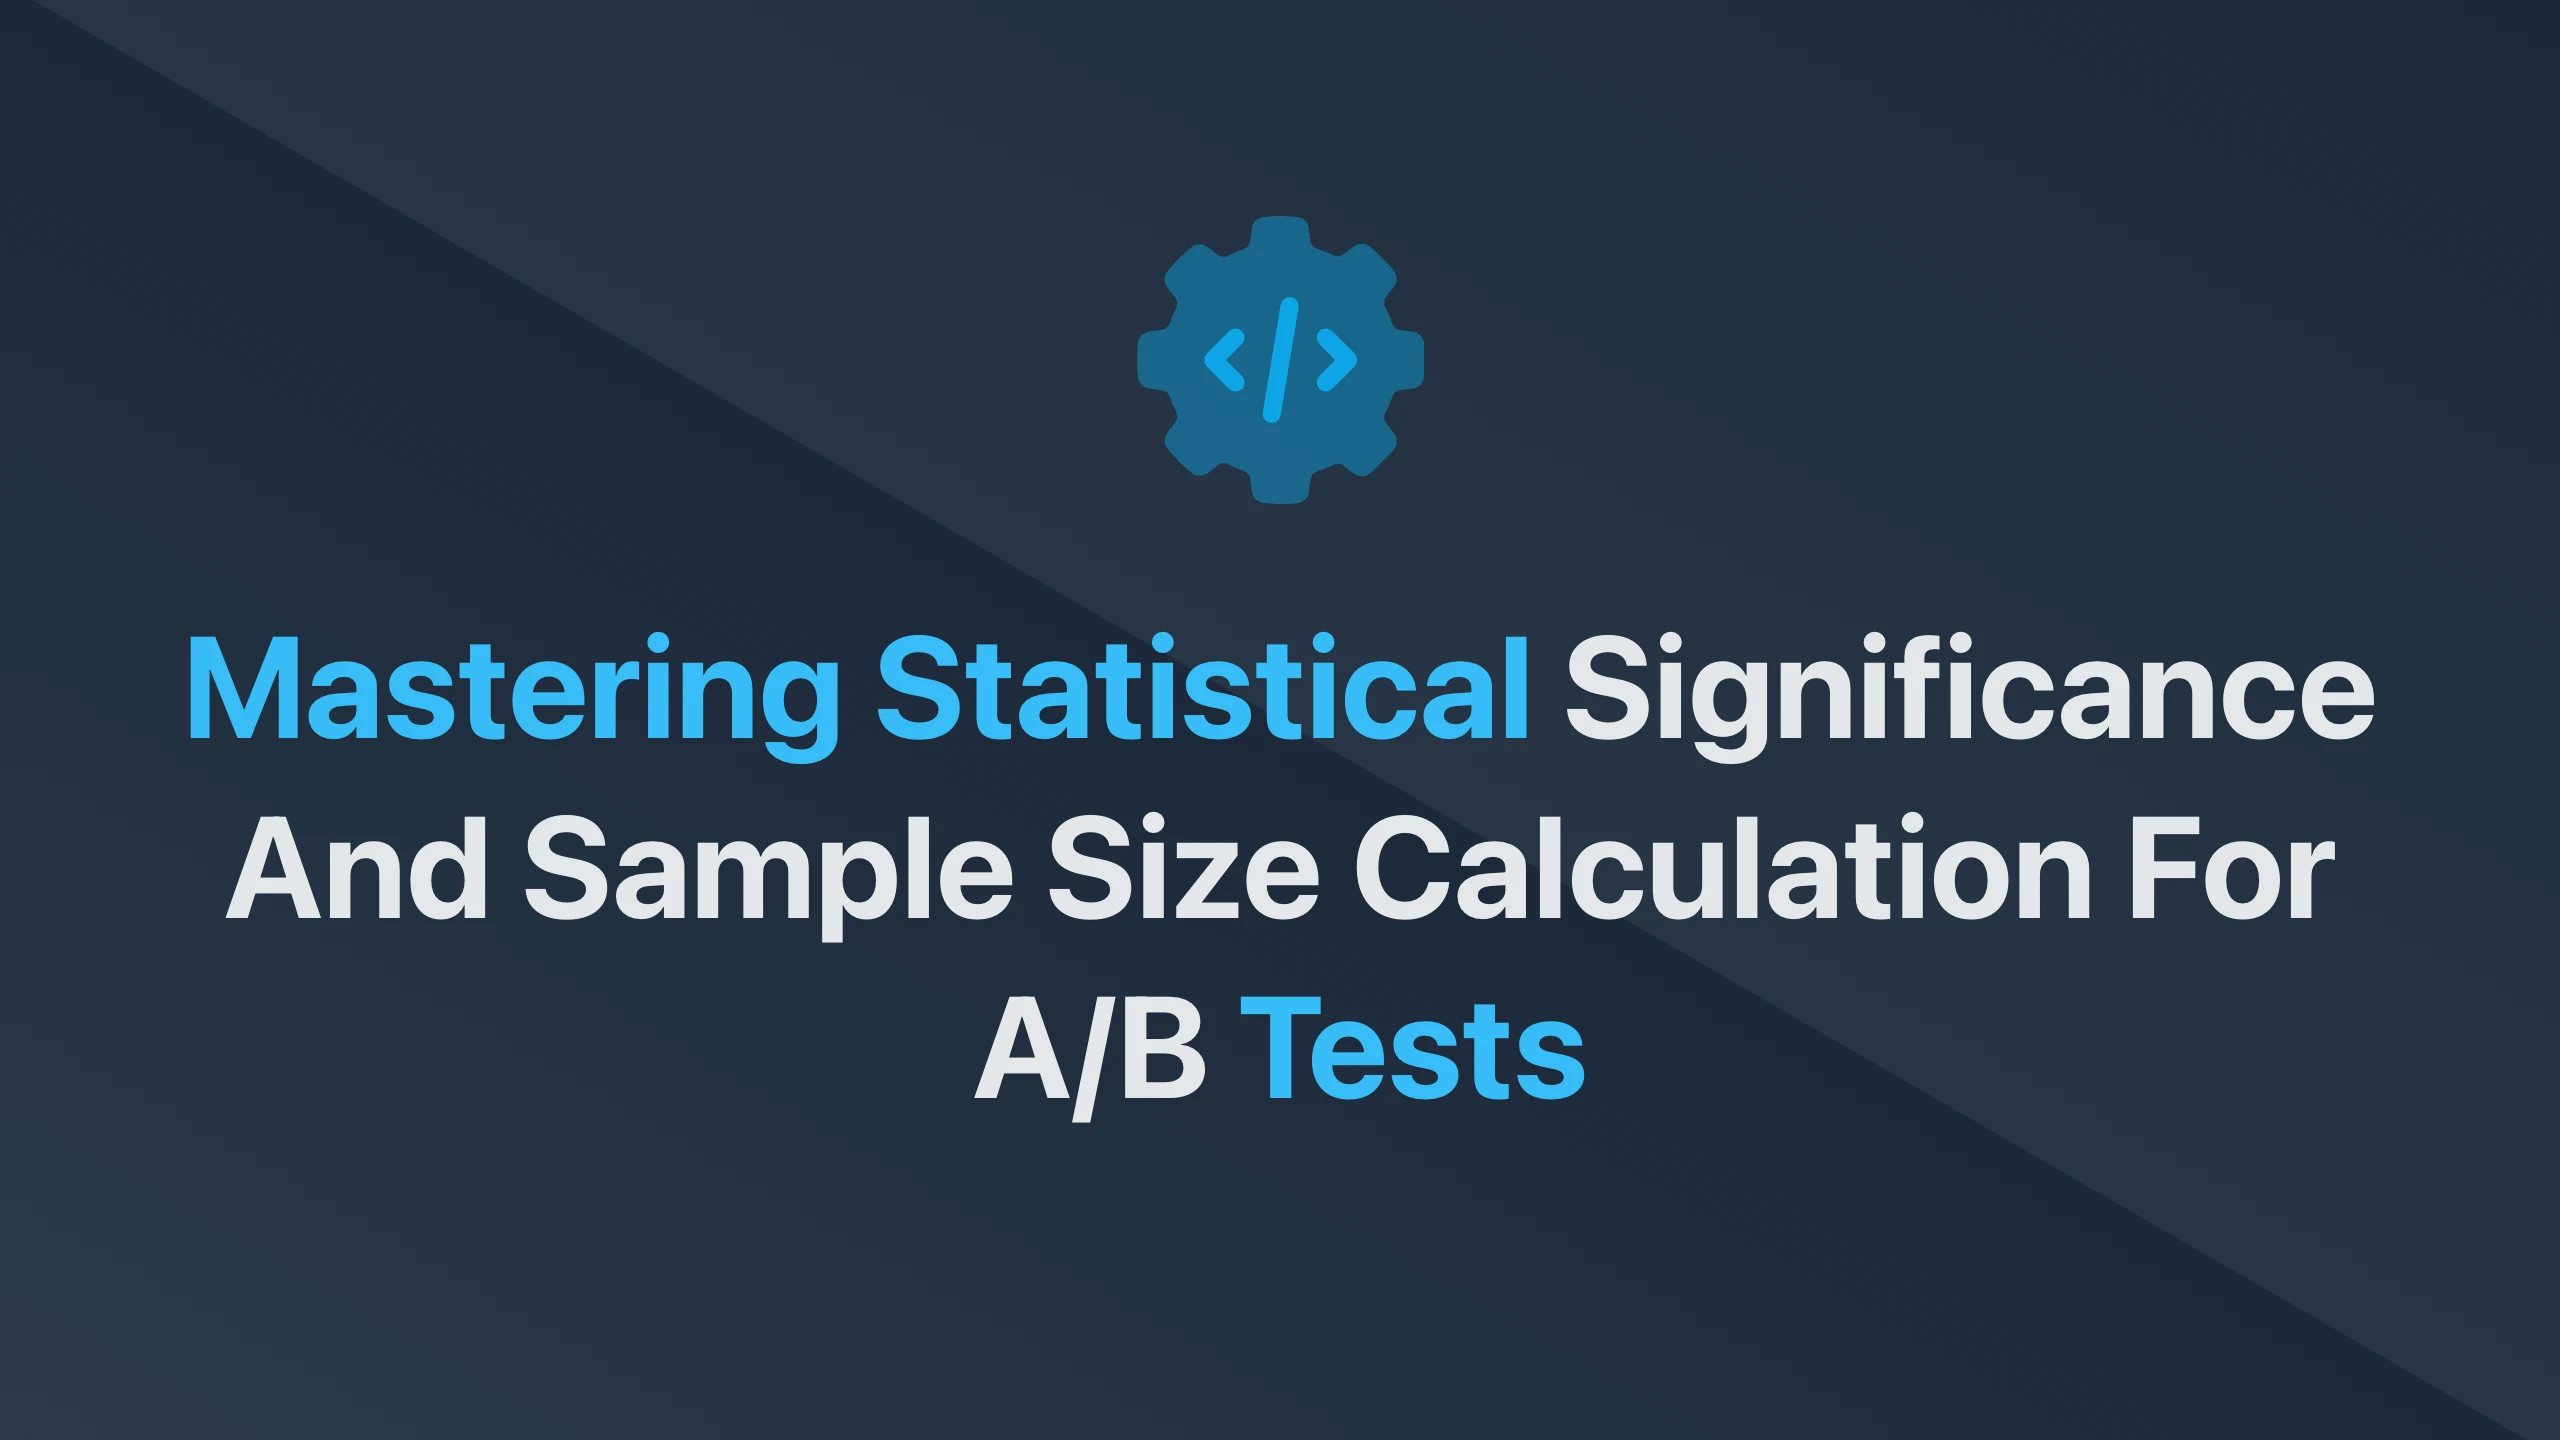 Cover Image for Mastering Statistical Significance and Sample Size Calculation for A/B Tests